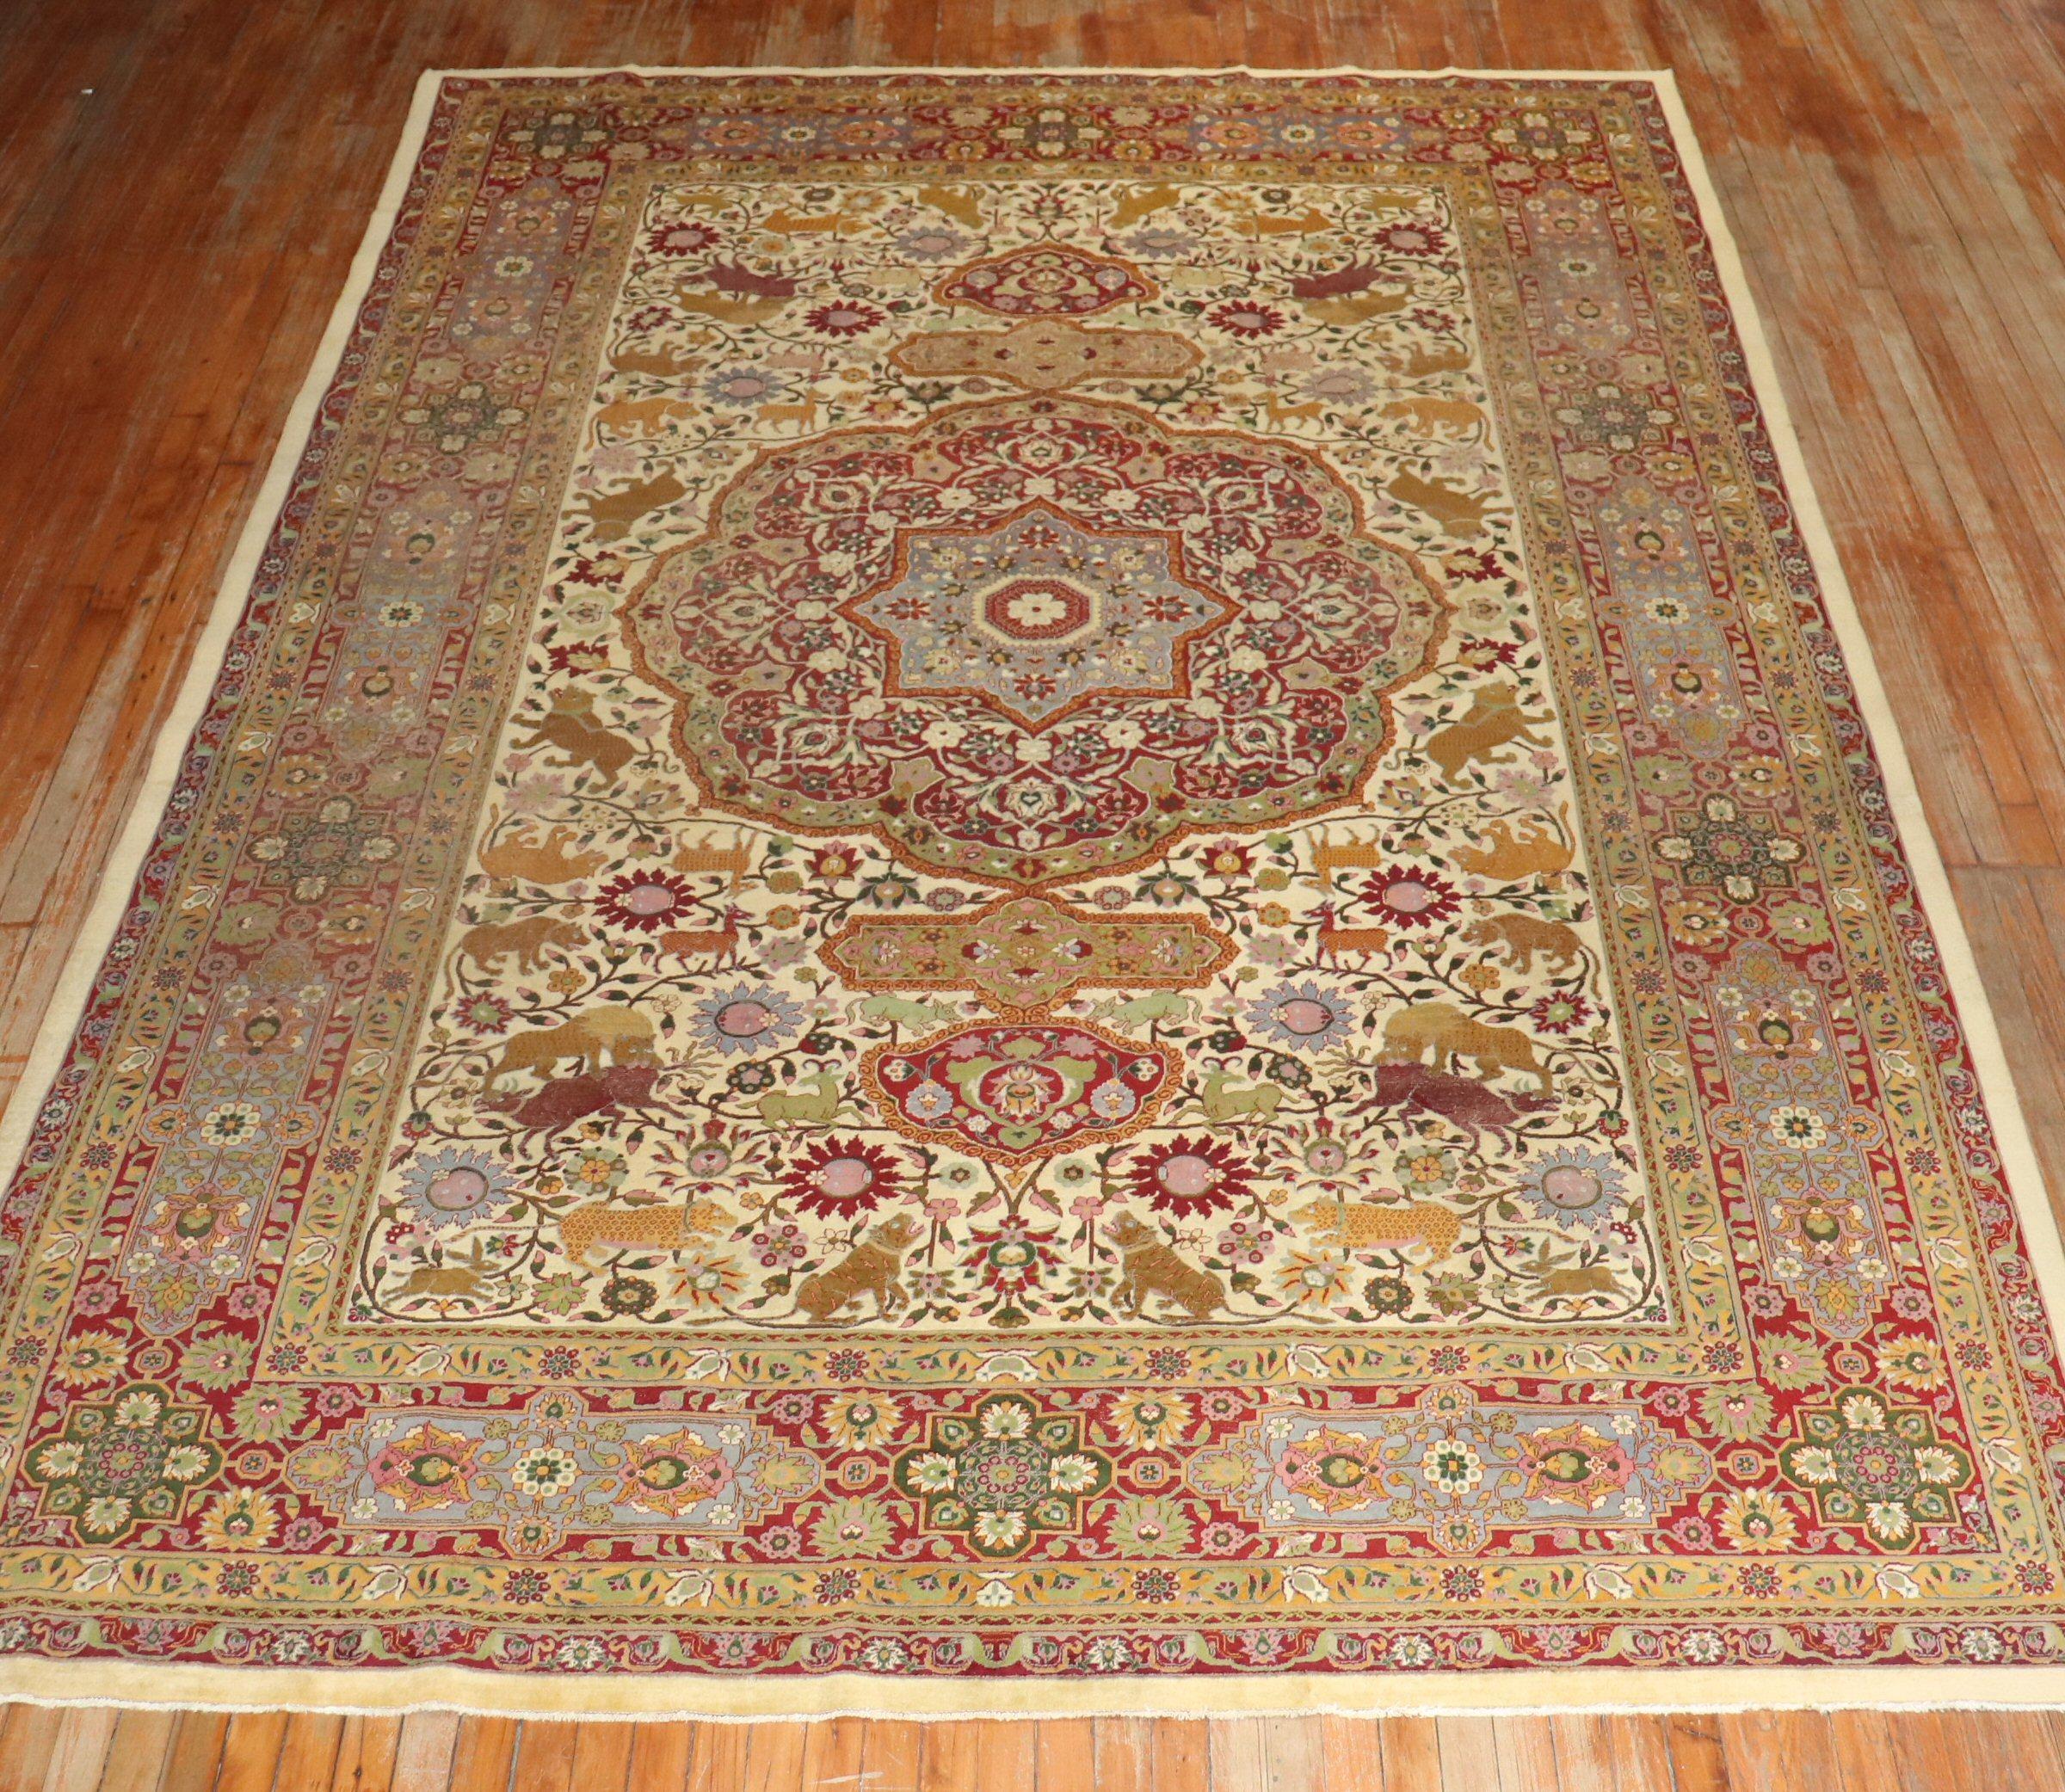 Late 19th Century Antique Indian Amritsar rug with an animal pictorial pattern with some age-related wear

 Measures: 8'2'' x 12'4